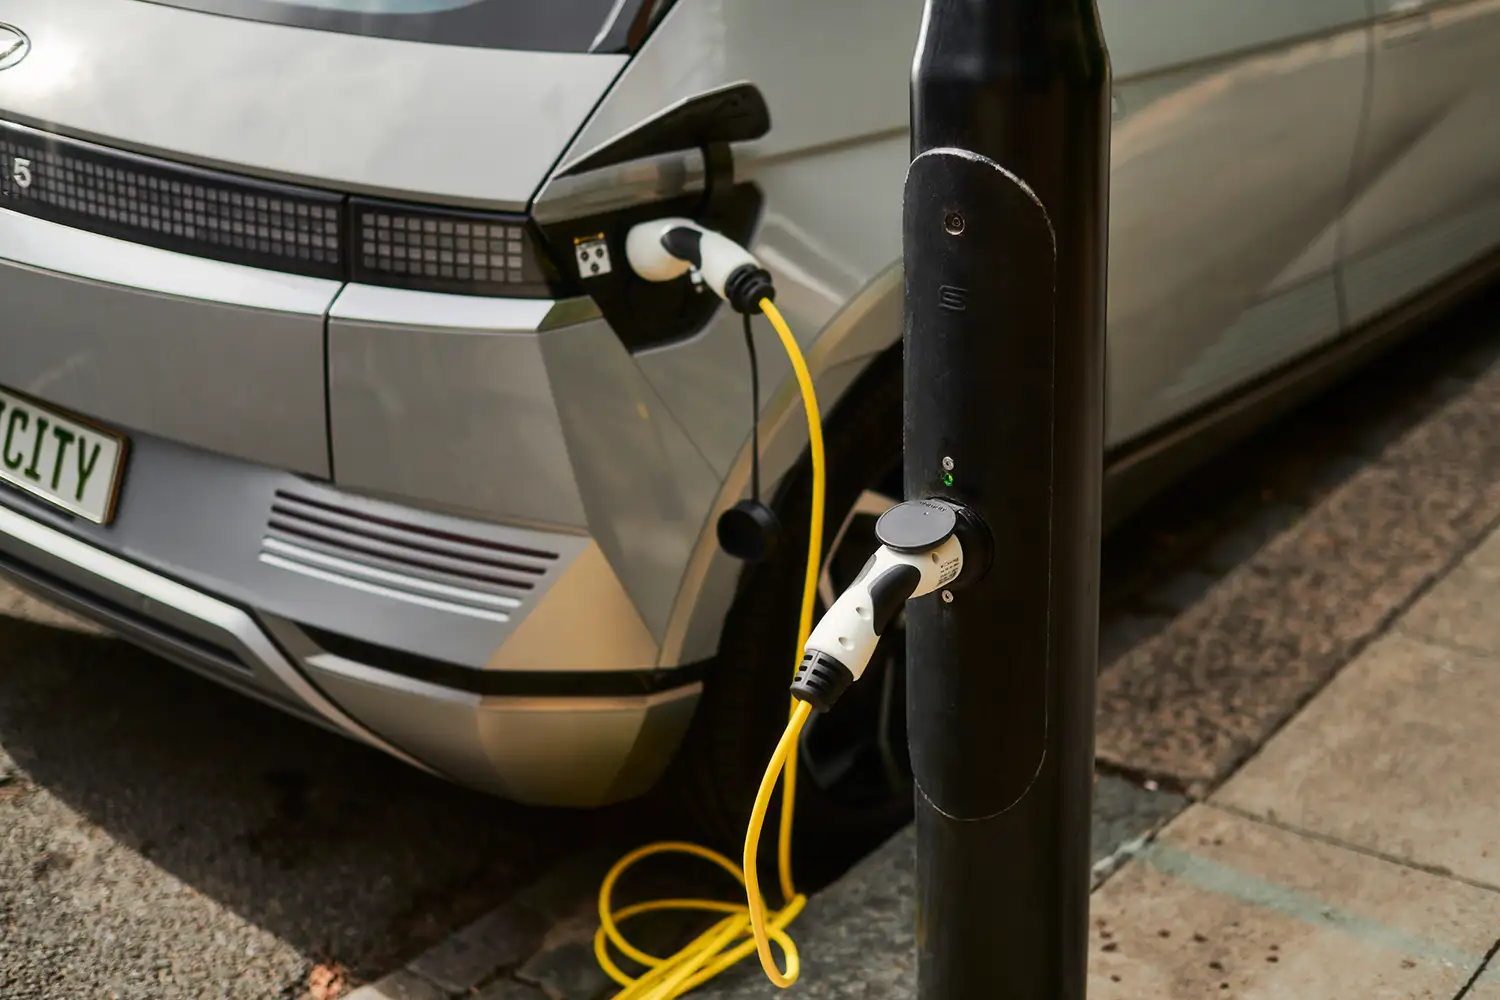 An EV is connected to an lamppost charging station from ubitricity, a company with expertise in rolling out public chargers for electric vehicles.